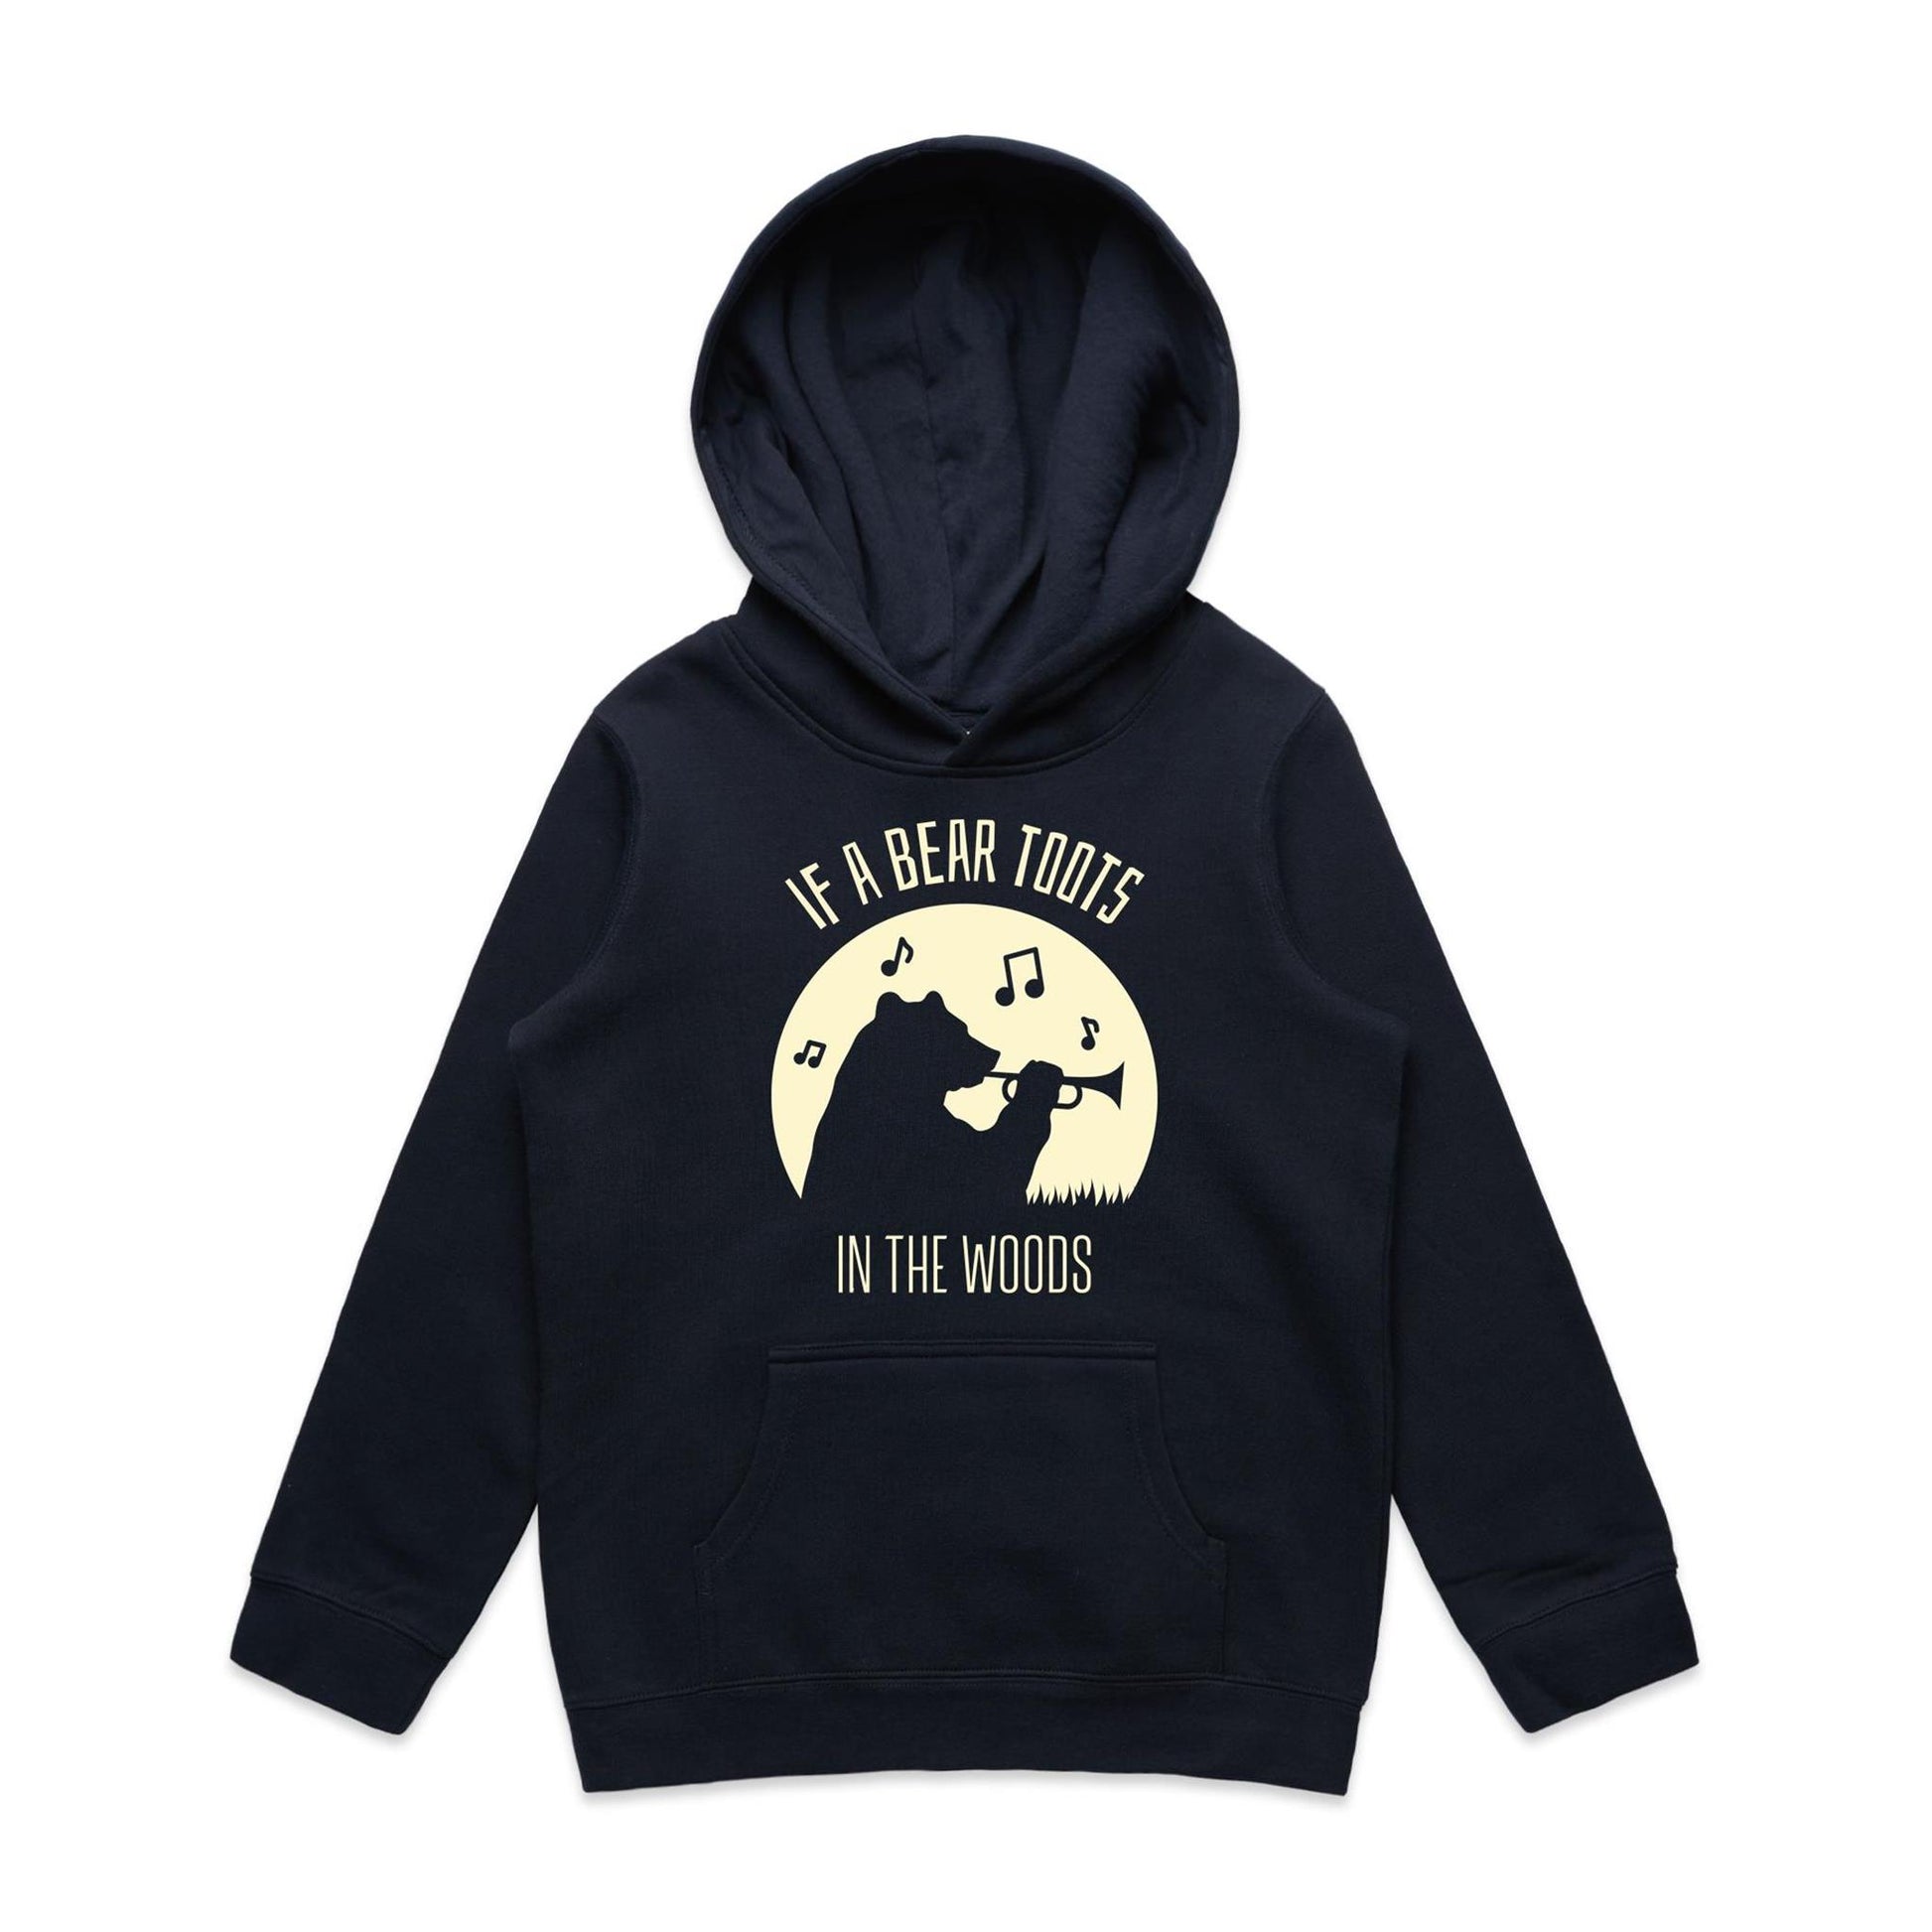 If A Bear Toots In The Woods, Trumpet Player - Youth Supply Hood Navy Kids Hoodie